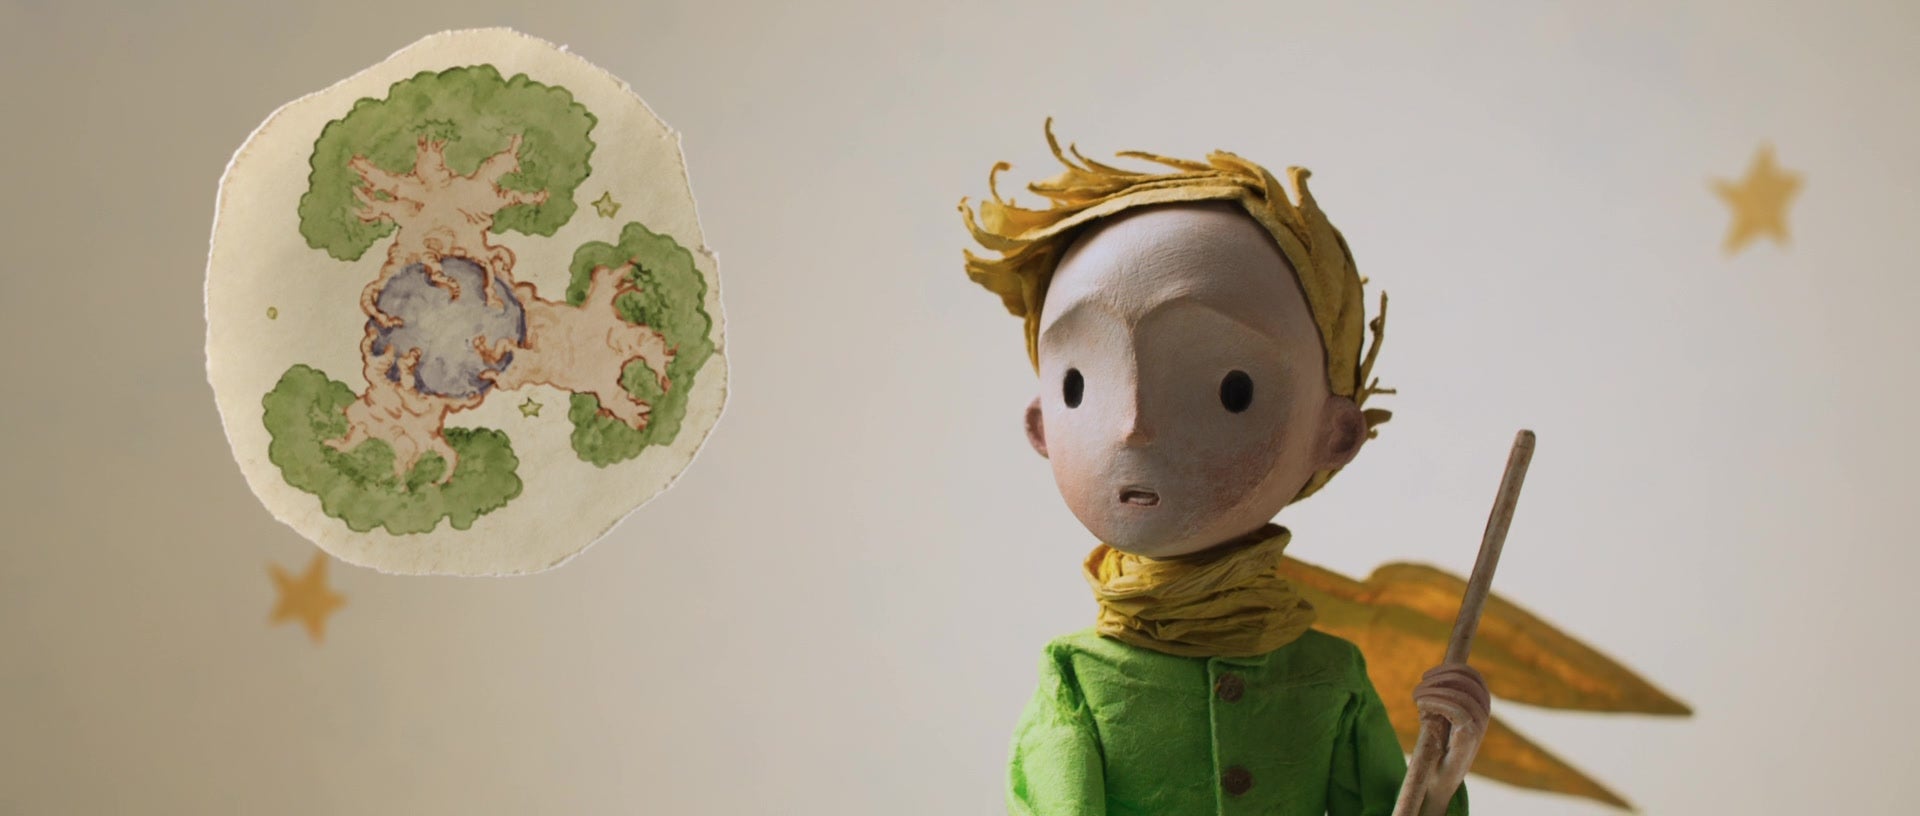 The Little Prince from the 2016 film